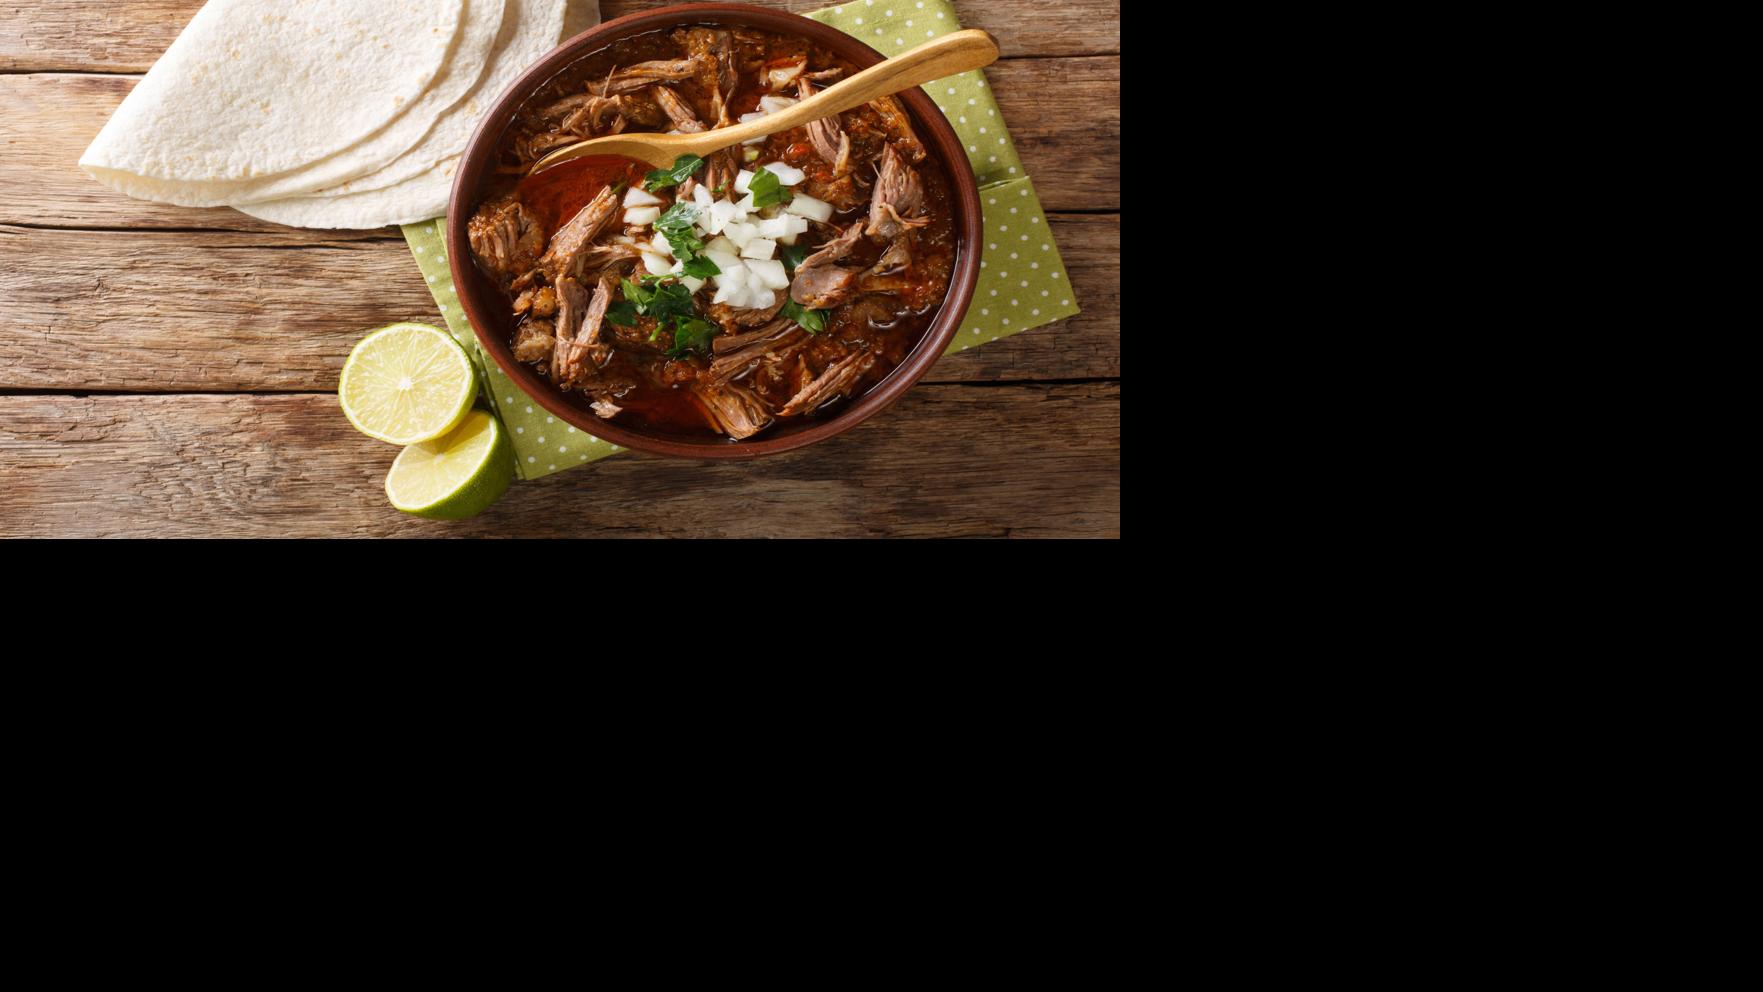 A bowl of beef birria may be a cure for what ails you – or just plain good